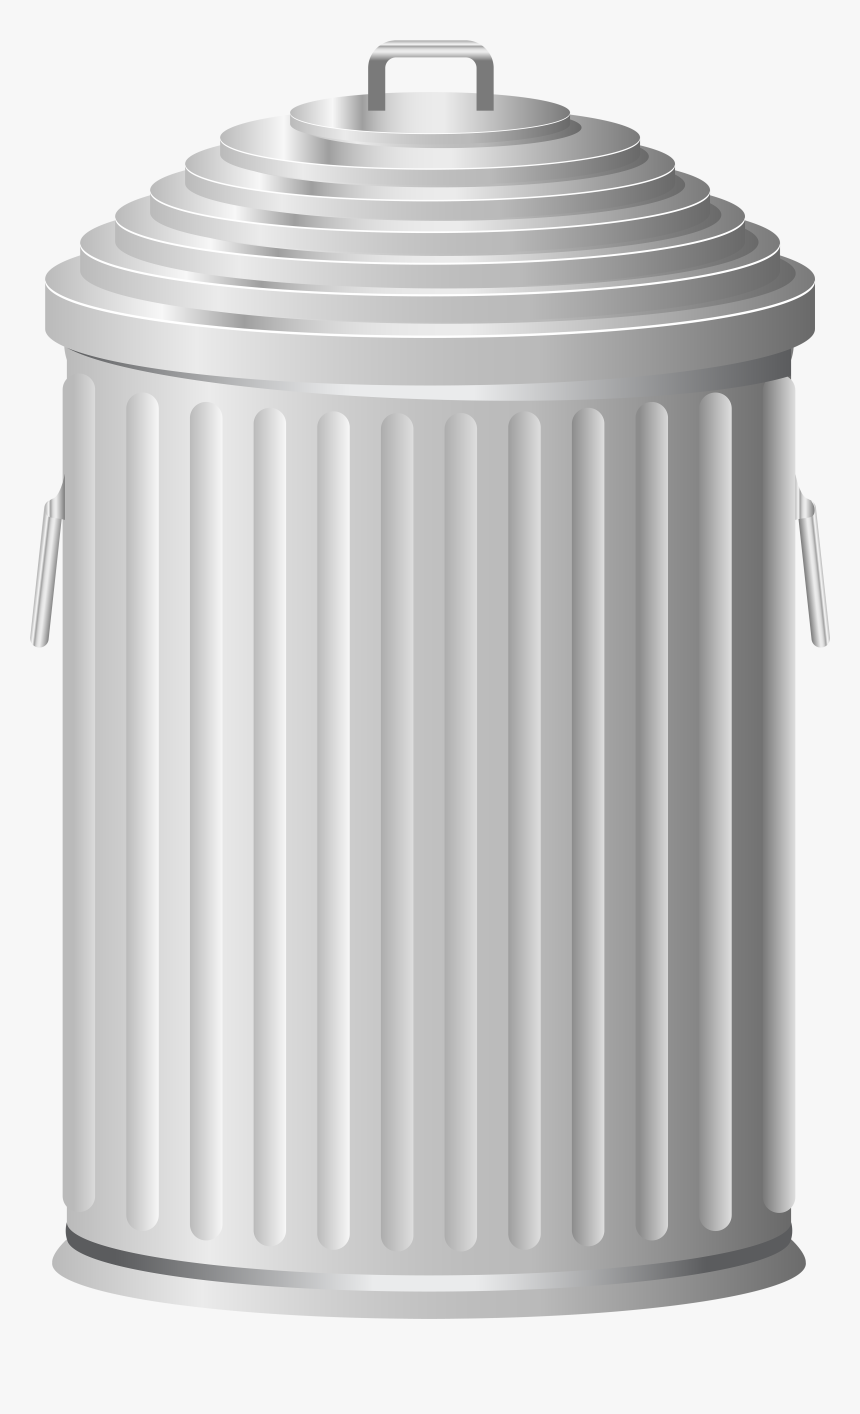 Metal Trash Can Png Clip Art Image - Home Appliance, Transparent Png, Free Download